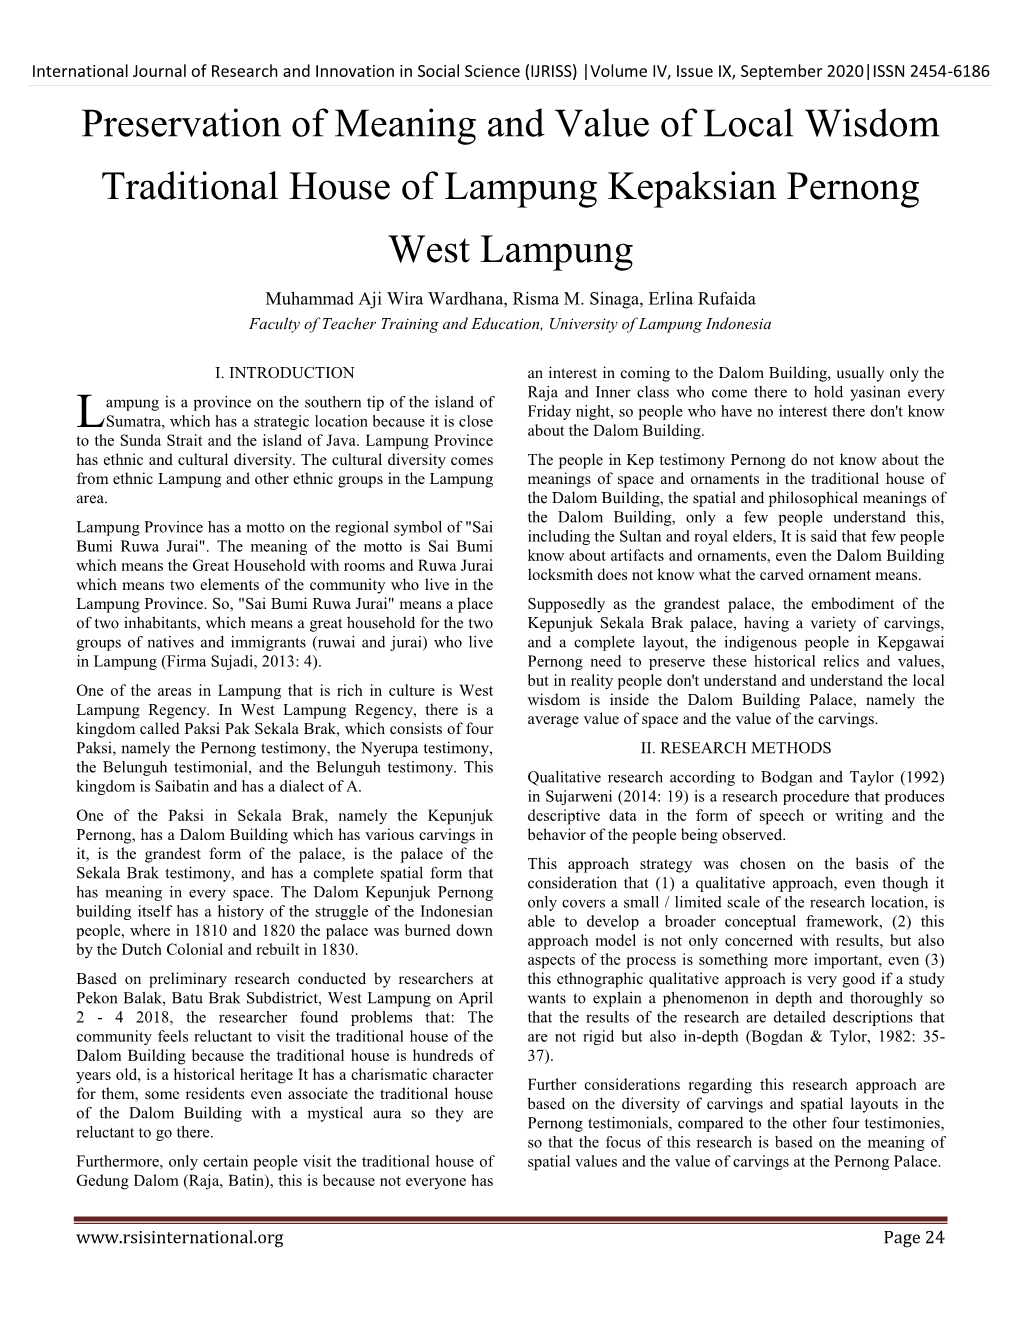 Preservation of Meaning and Value of Local Wisdom Traditional House of Lampung Kepaksian Pernong West Lampung